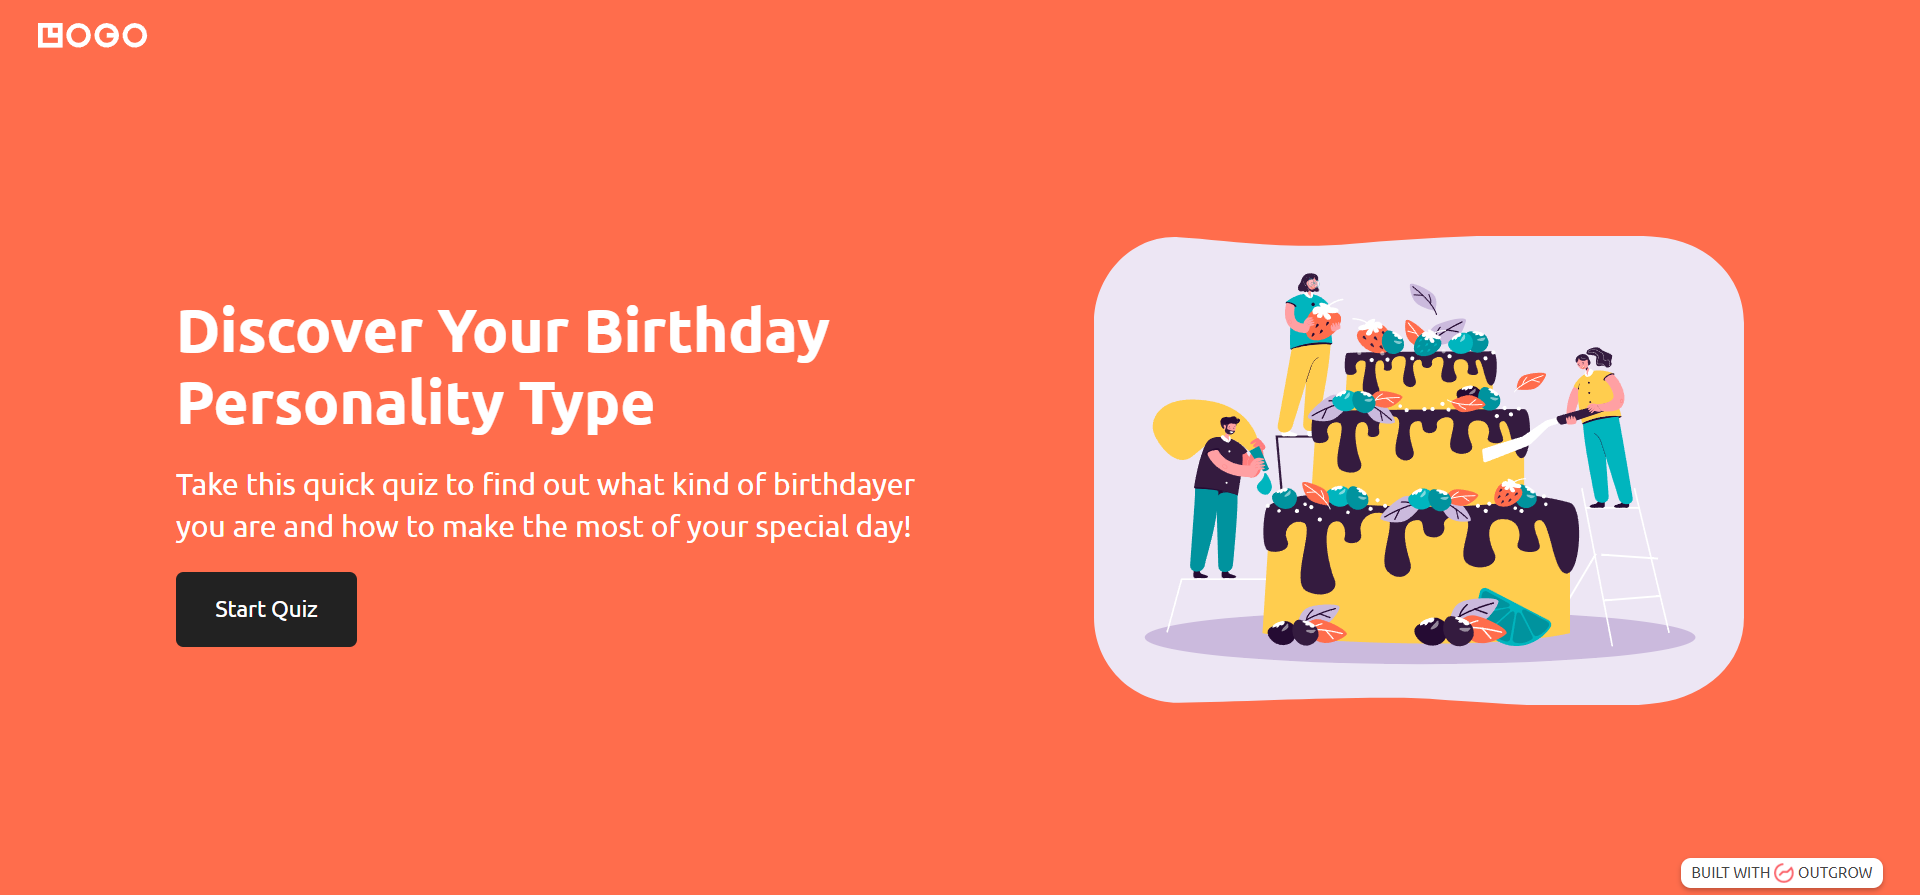 Discover Your Birthday Personality Type